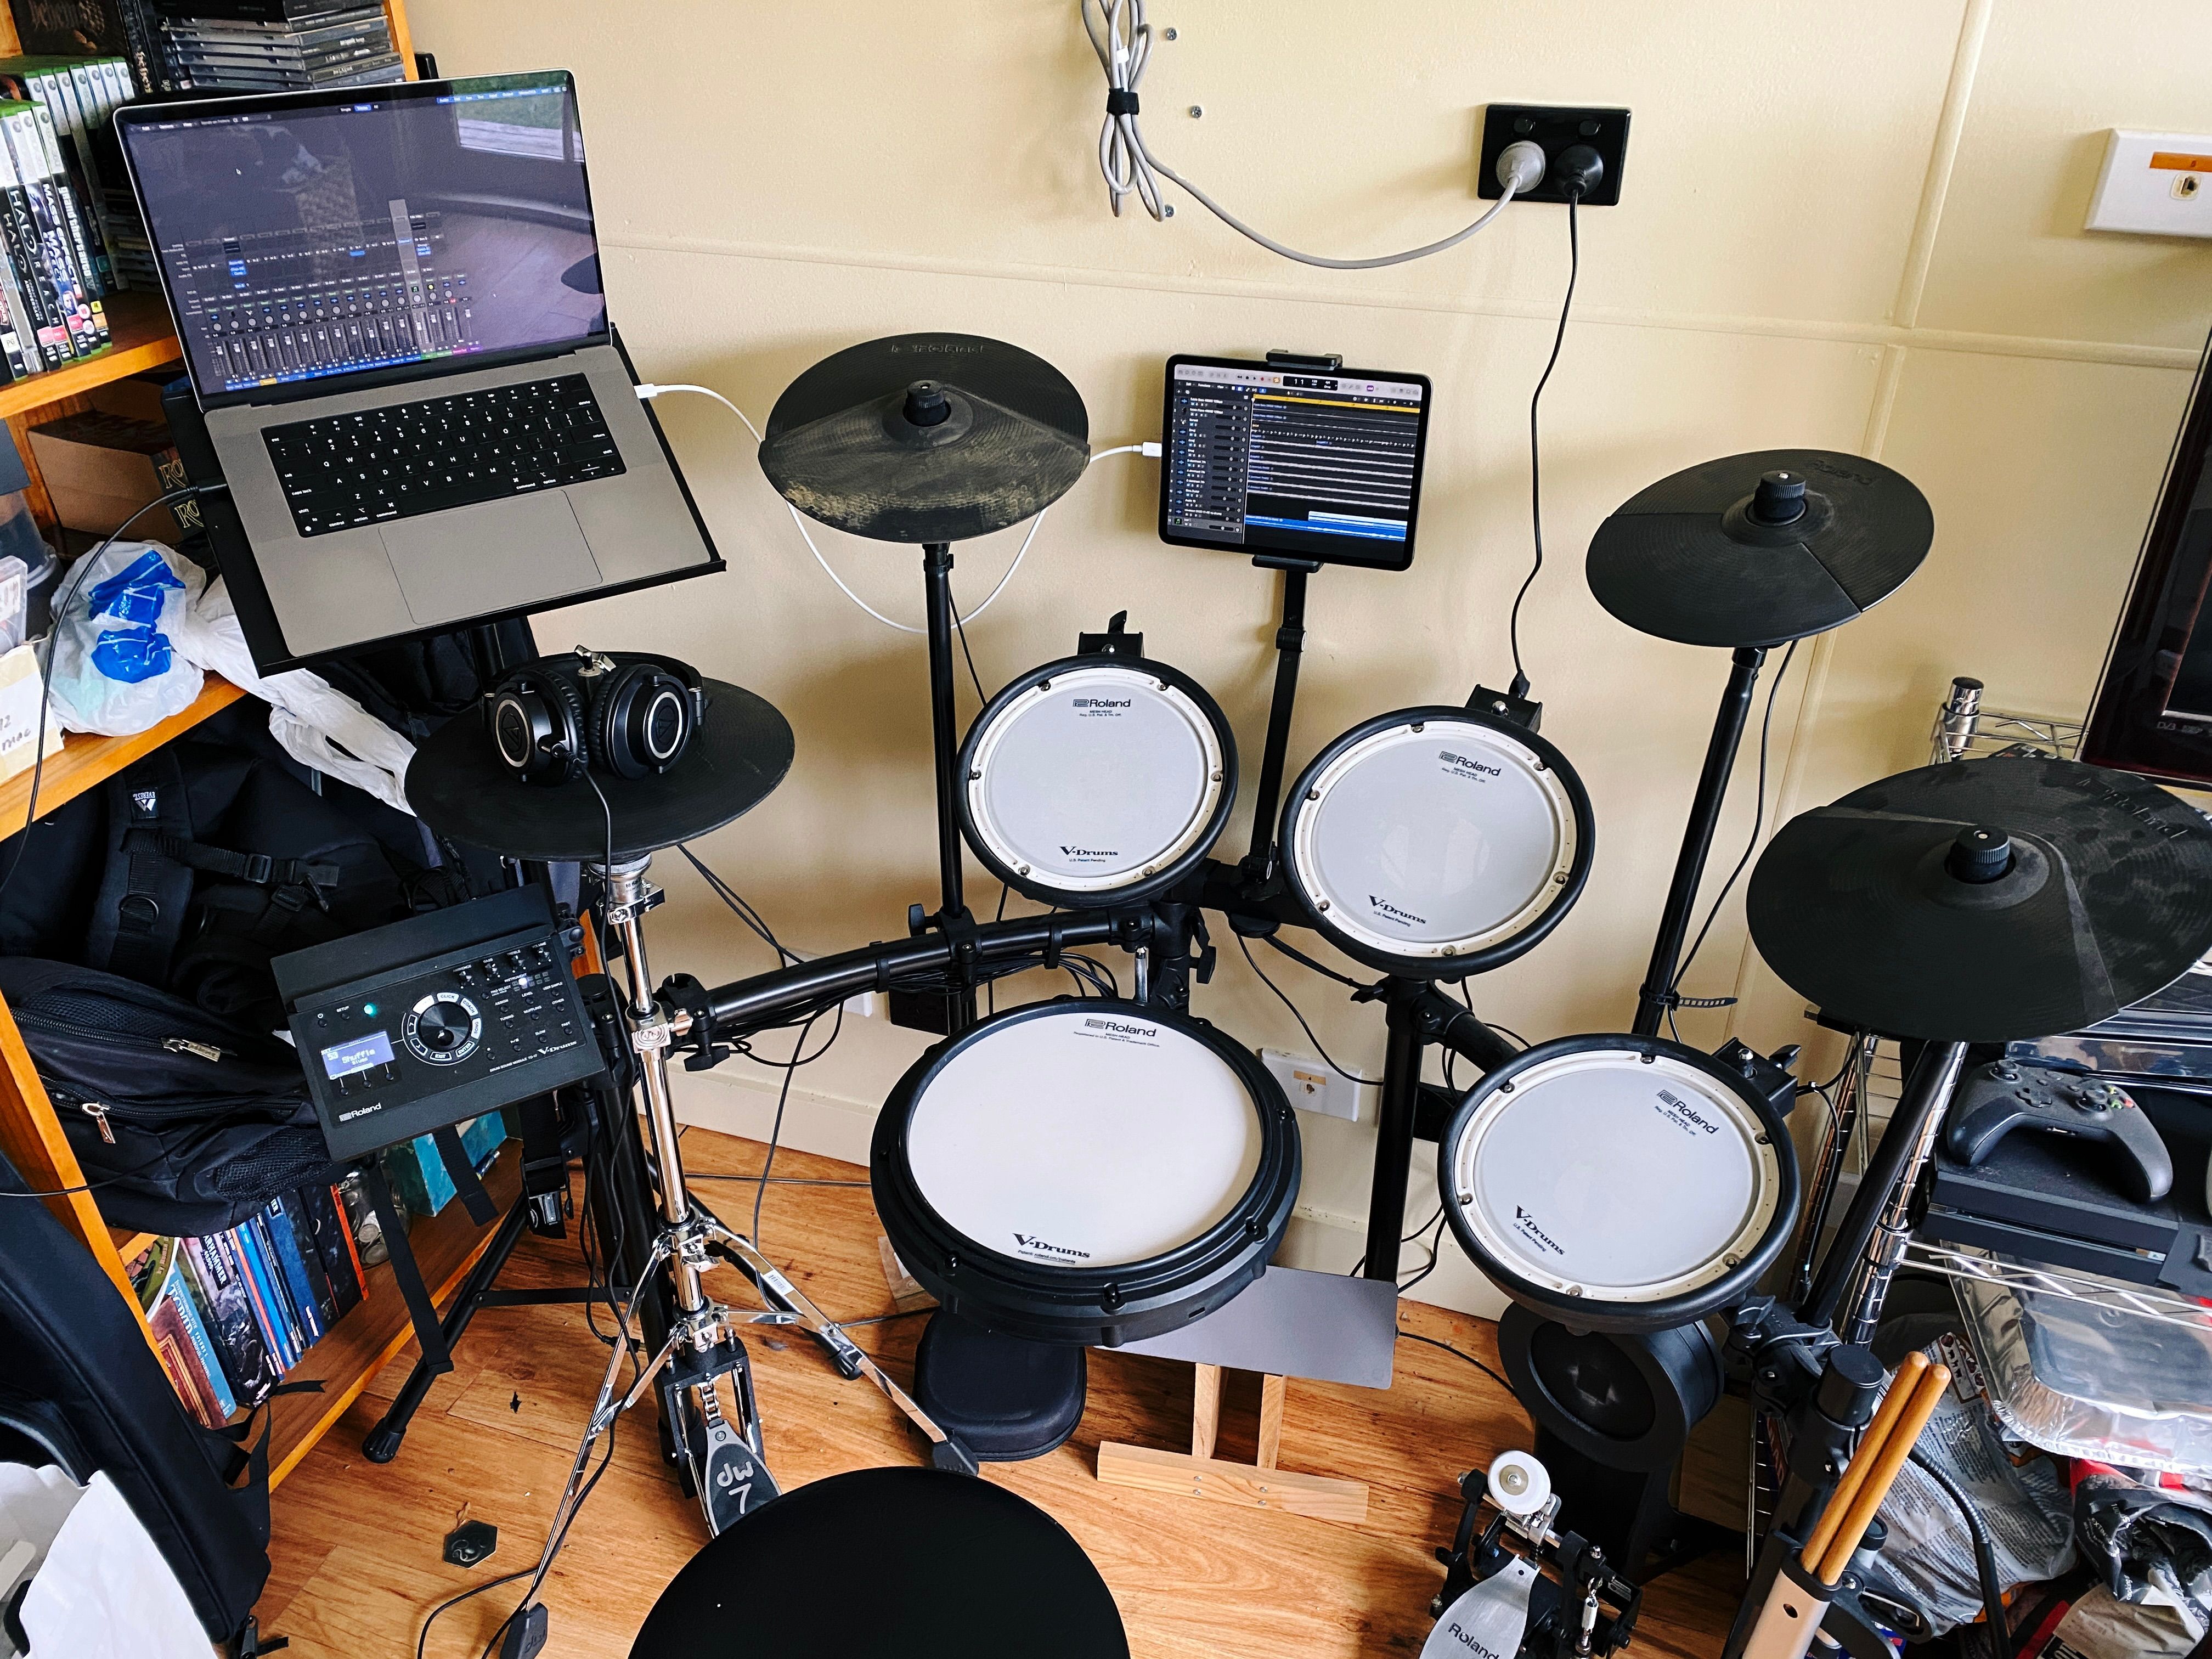 A photo of my Roland V-Drums electronic drum kit with my laptop open on a stand behind and to the left of the kit and my iPad being used as a second display for the laptop on the stand in the middle of the drum kit between the cymbals so I can see where in the song I am without needing to look awkwardly over to the left.